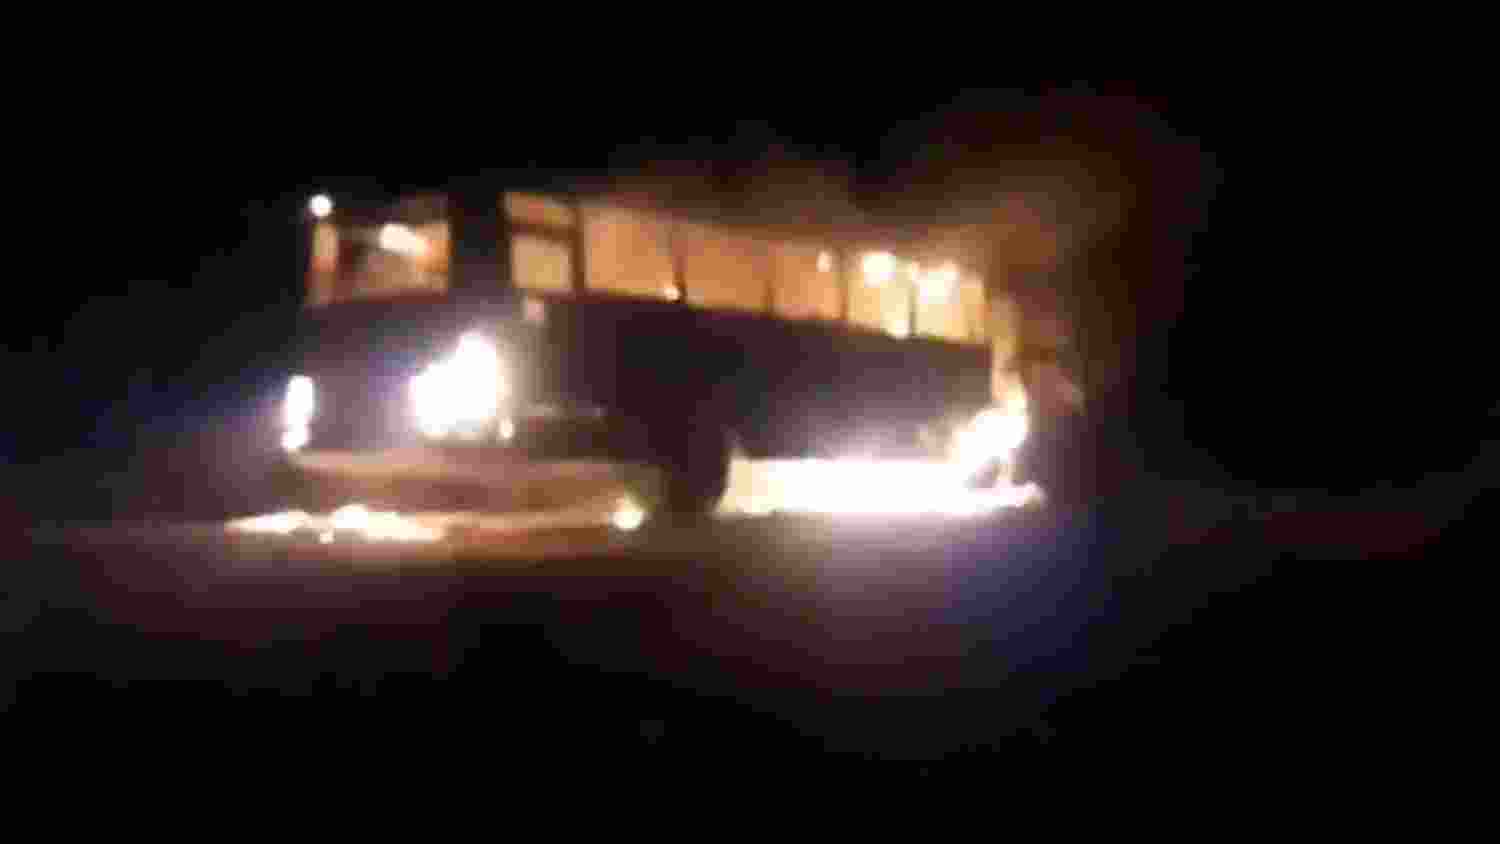 EVMs damaged in MP's Betul bus fire, repolling likely; no casualties